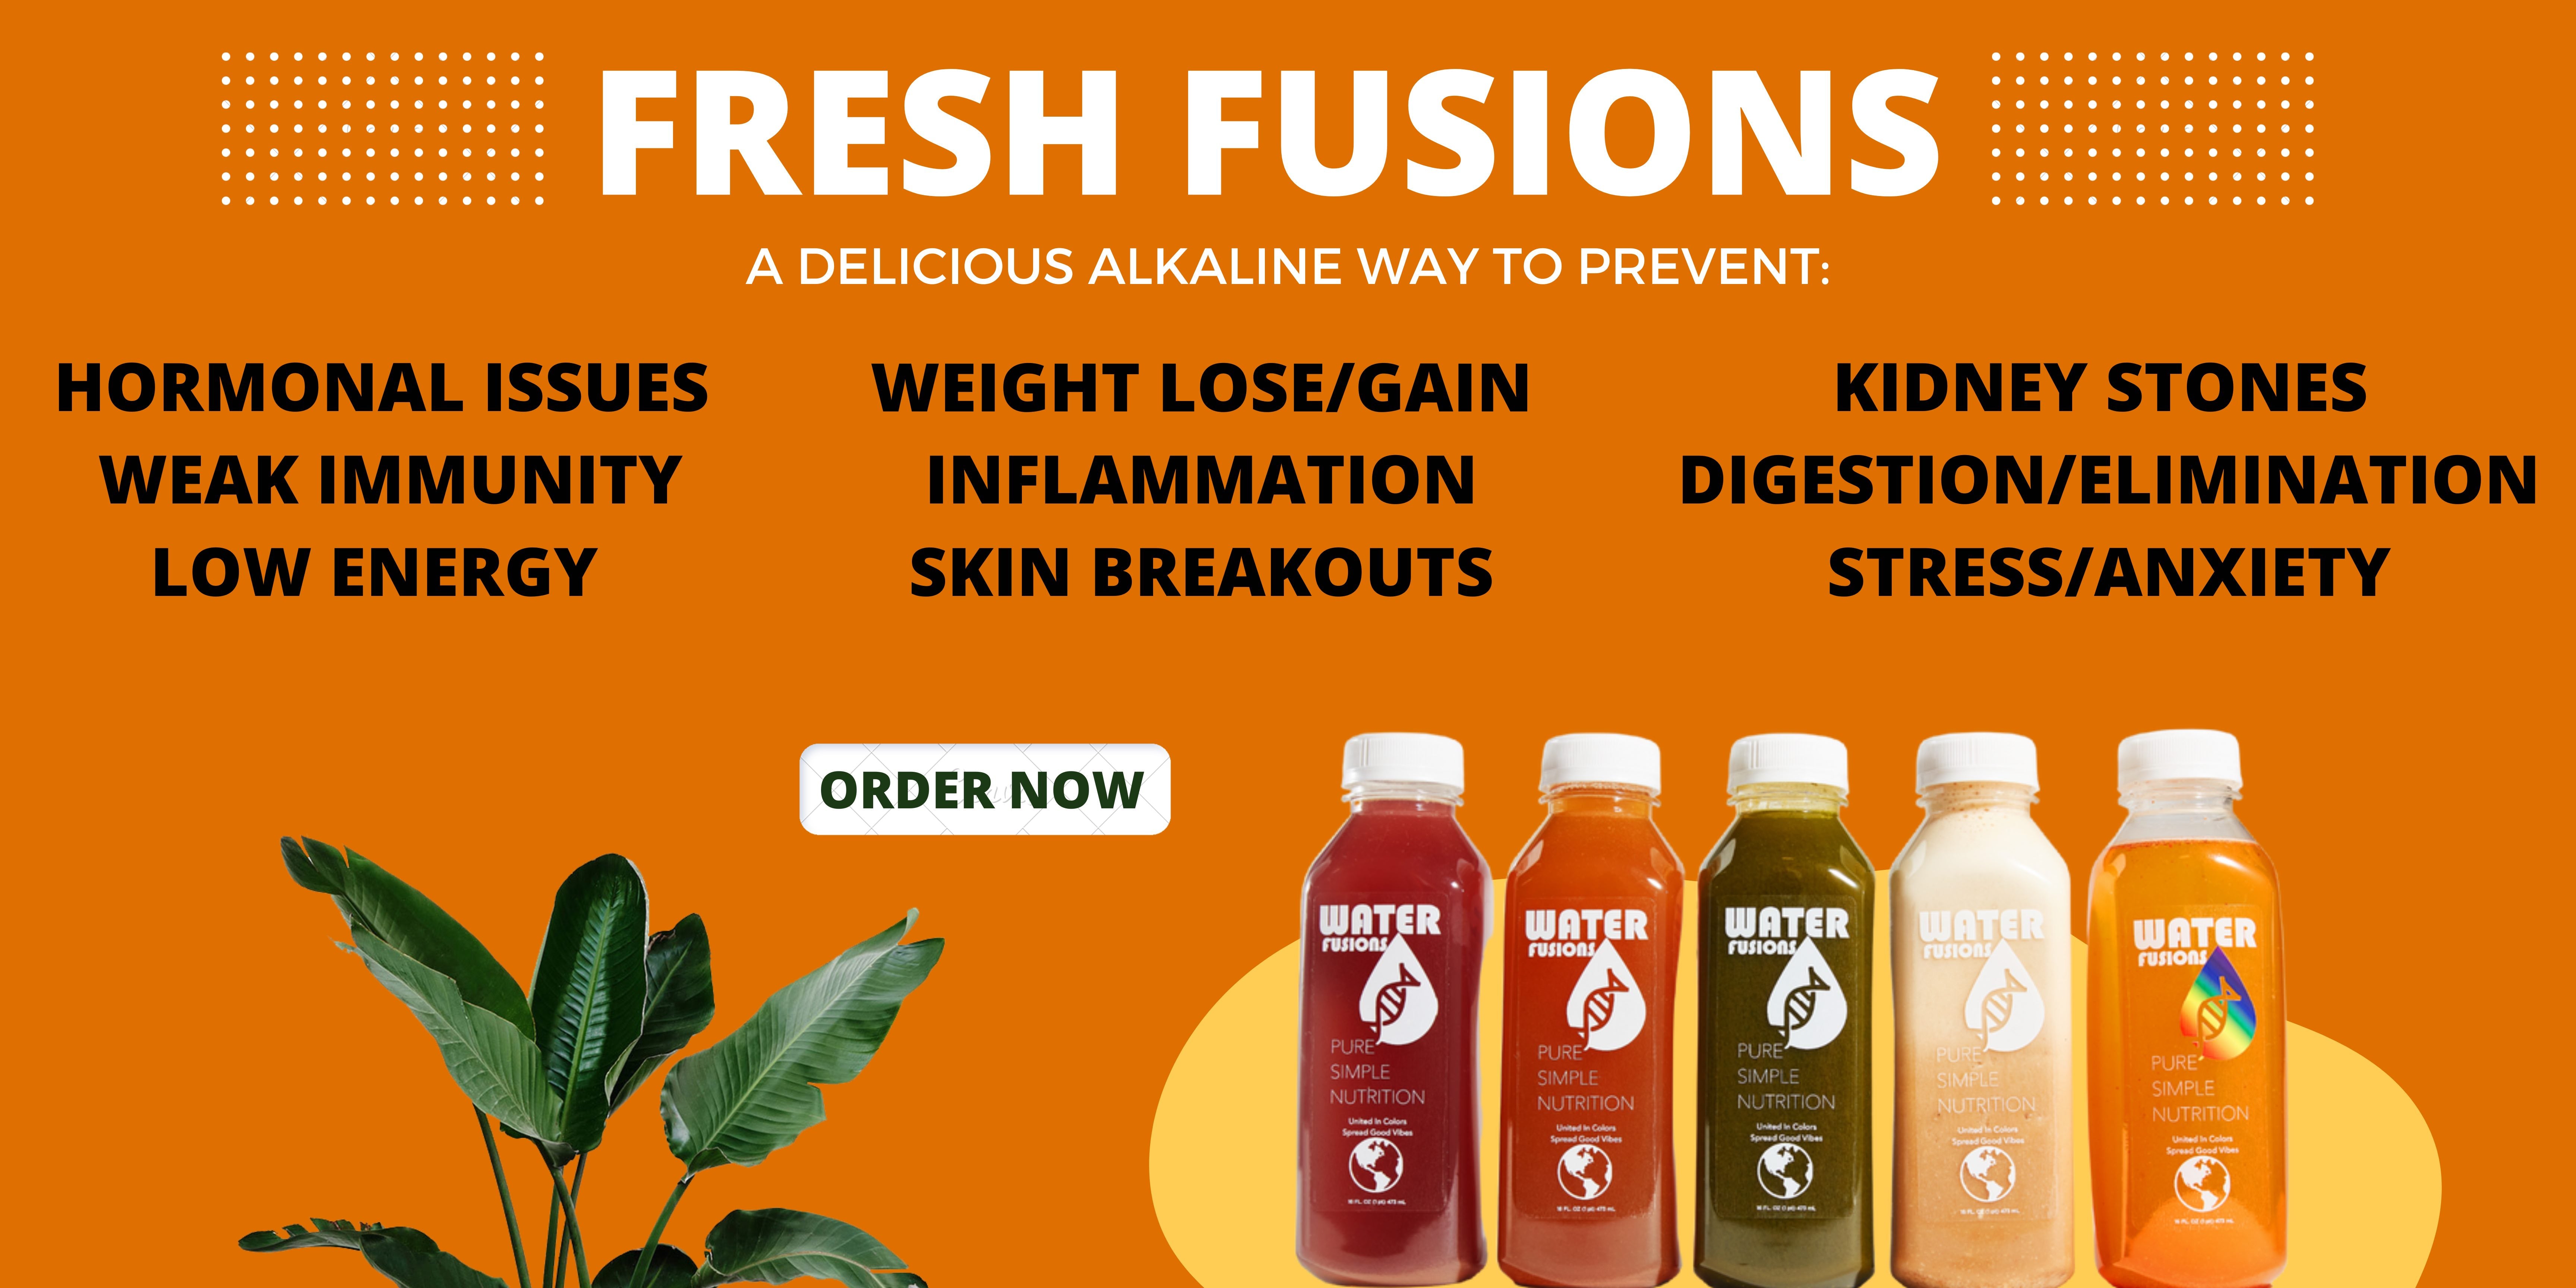 Five drink nutrient🧬detox plan of alkaline Water Fusions and 100 + pure nutrients: plants, vitamins and minerals. A liquid constituent of nutrients aimed to help stressed body functions and detox away burdens on organs caused from environmental toxins.